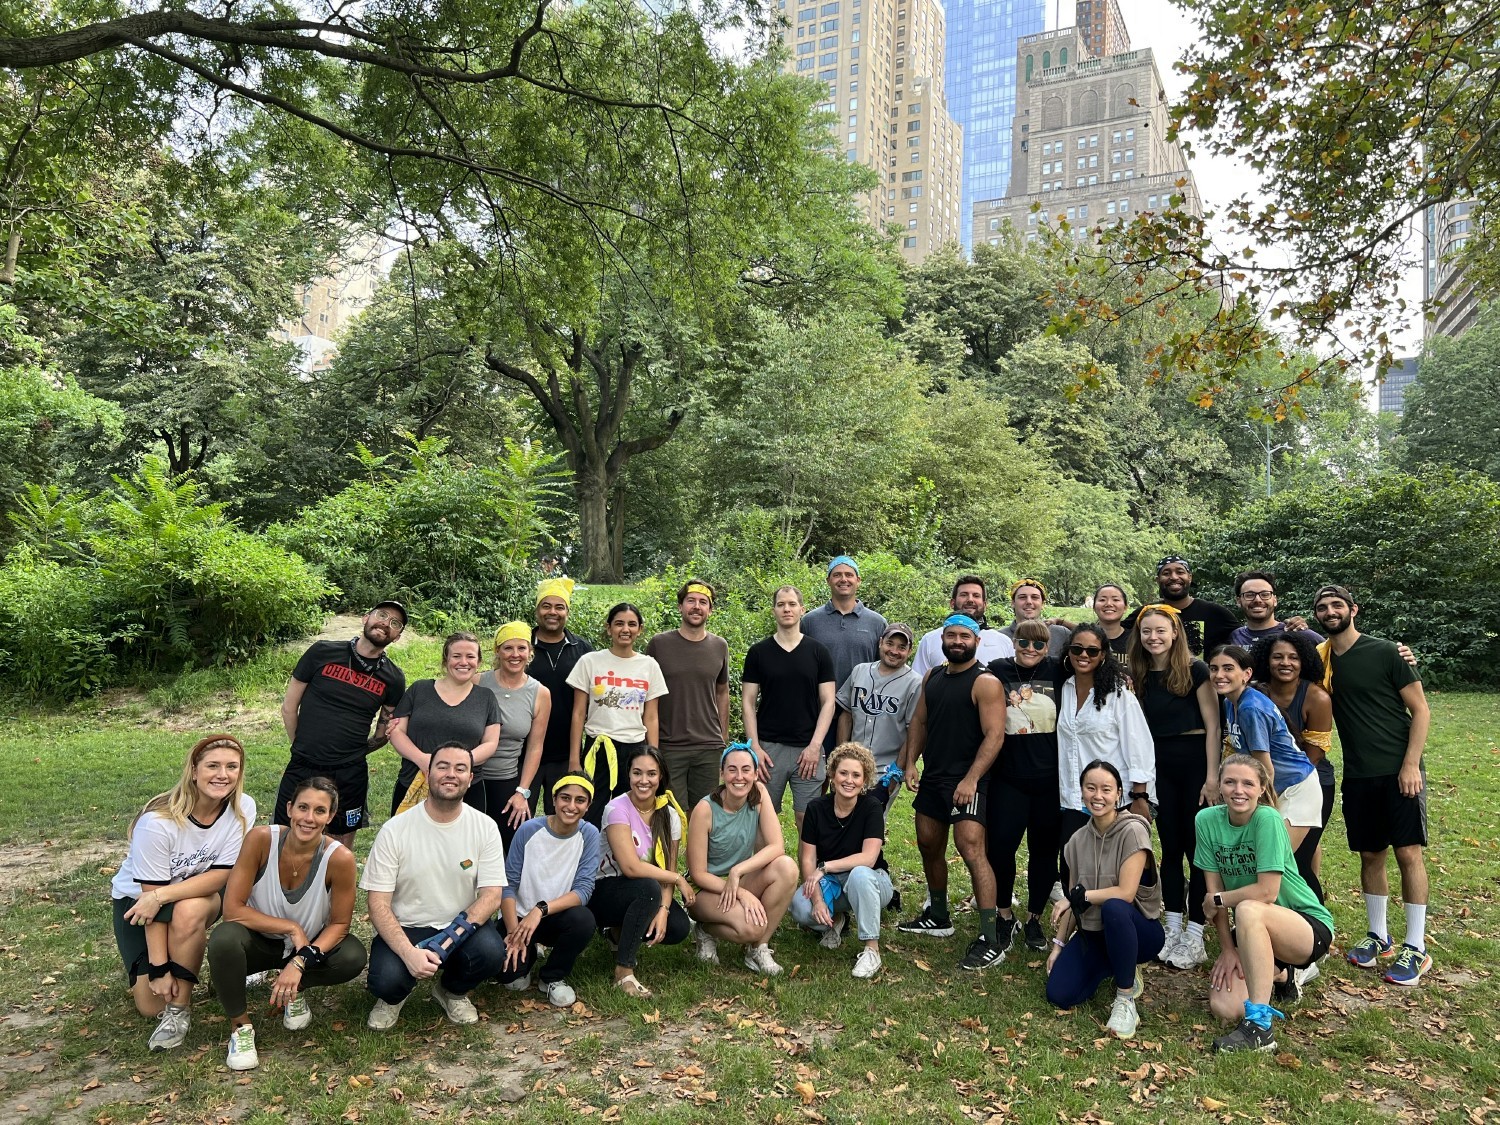 Our NYC team joined together for our Annual Field Day!